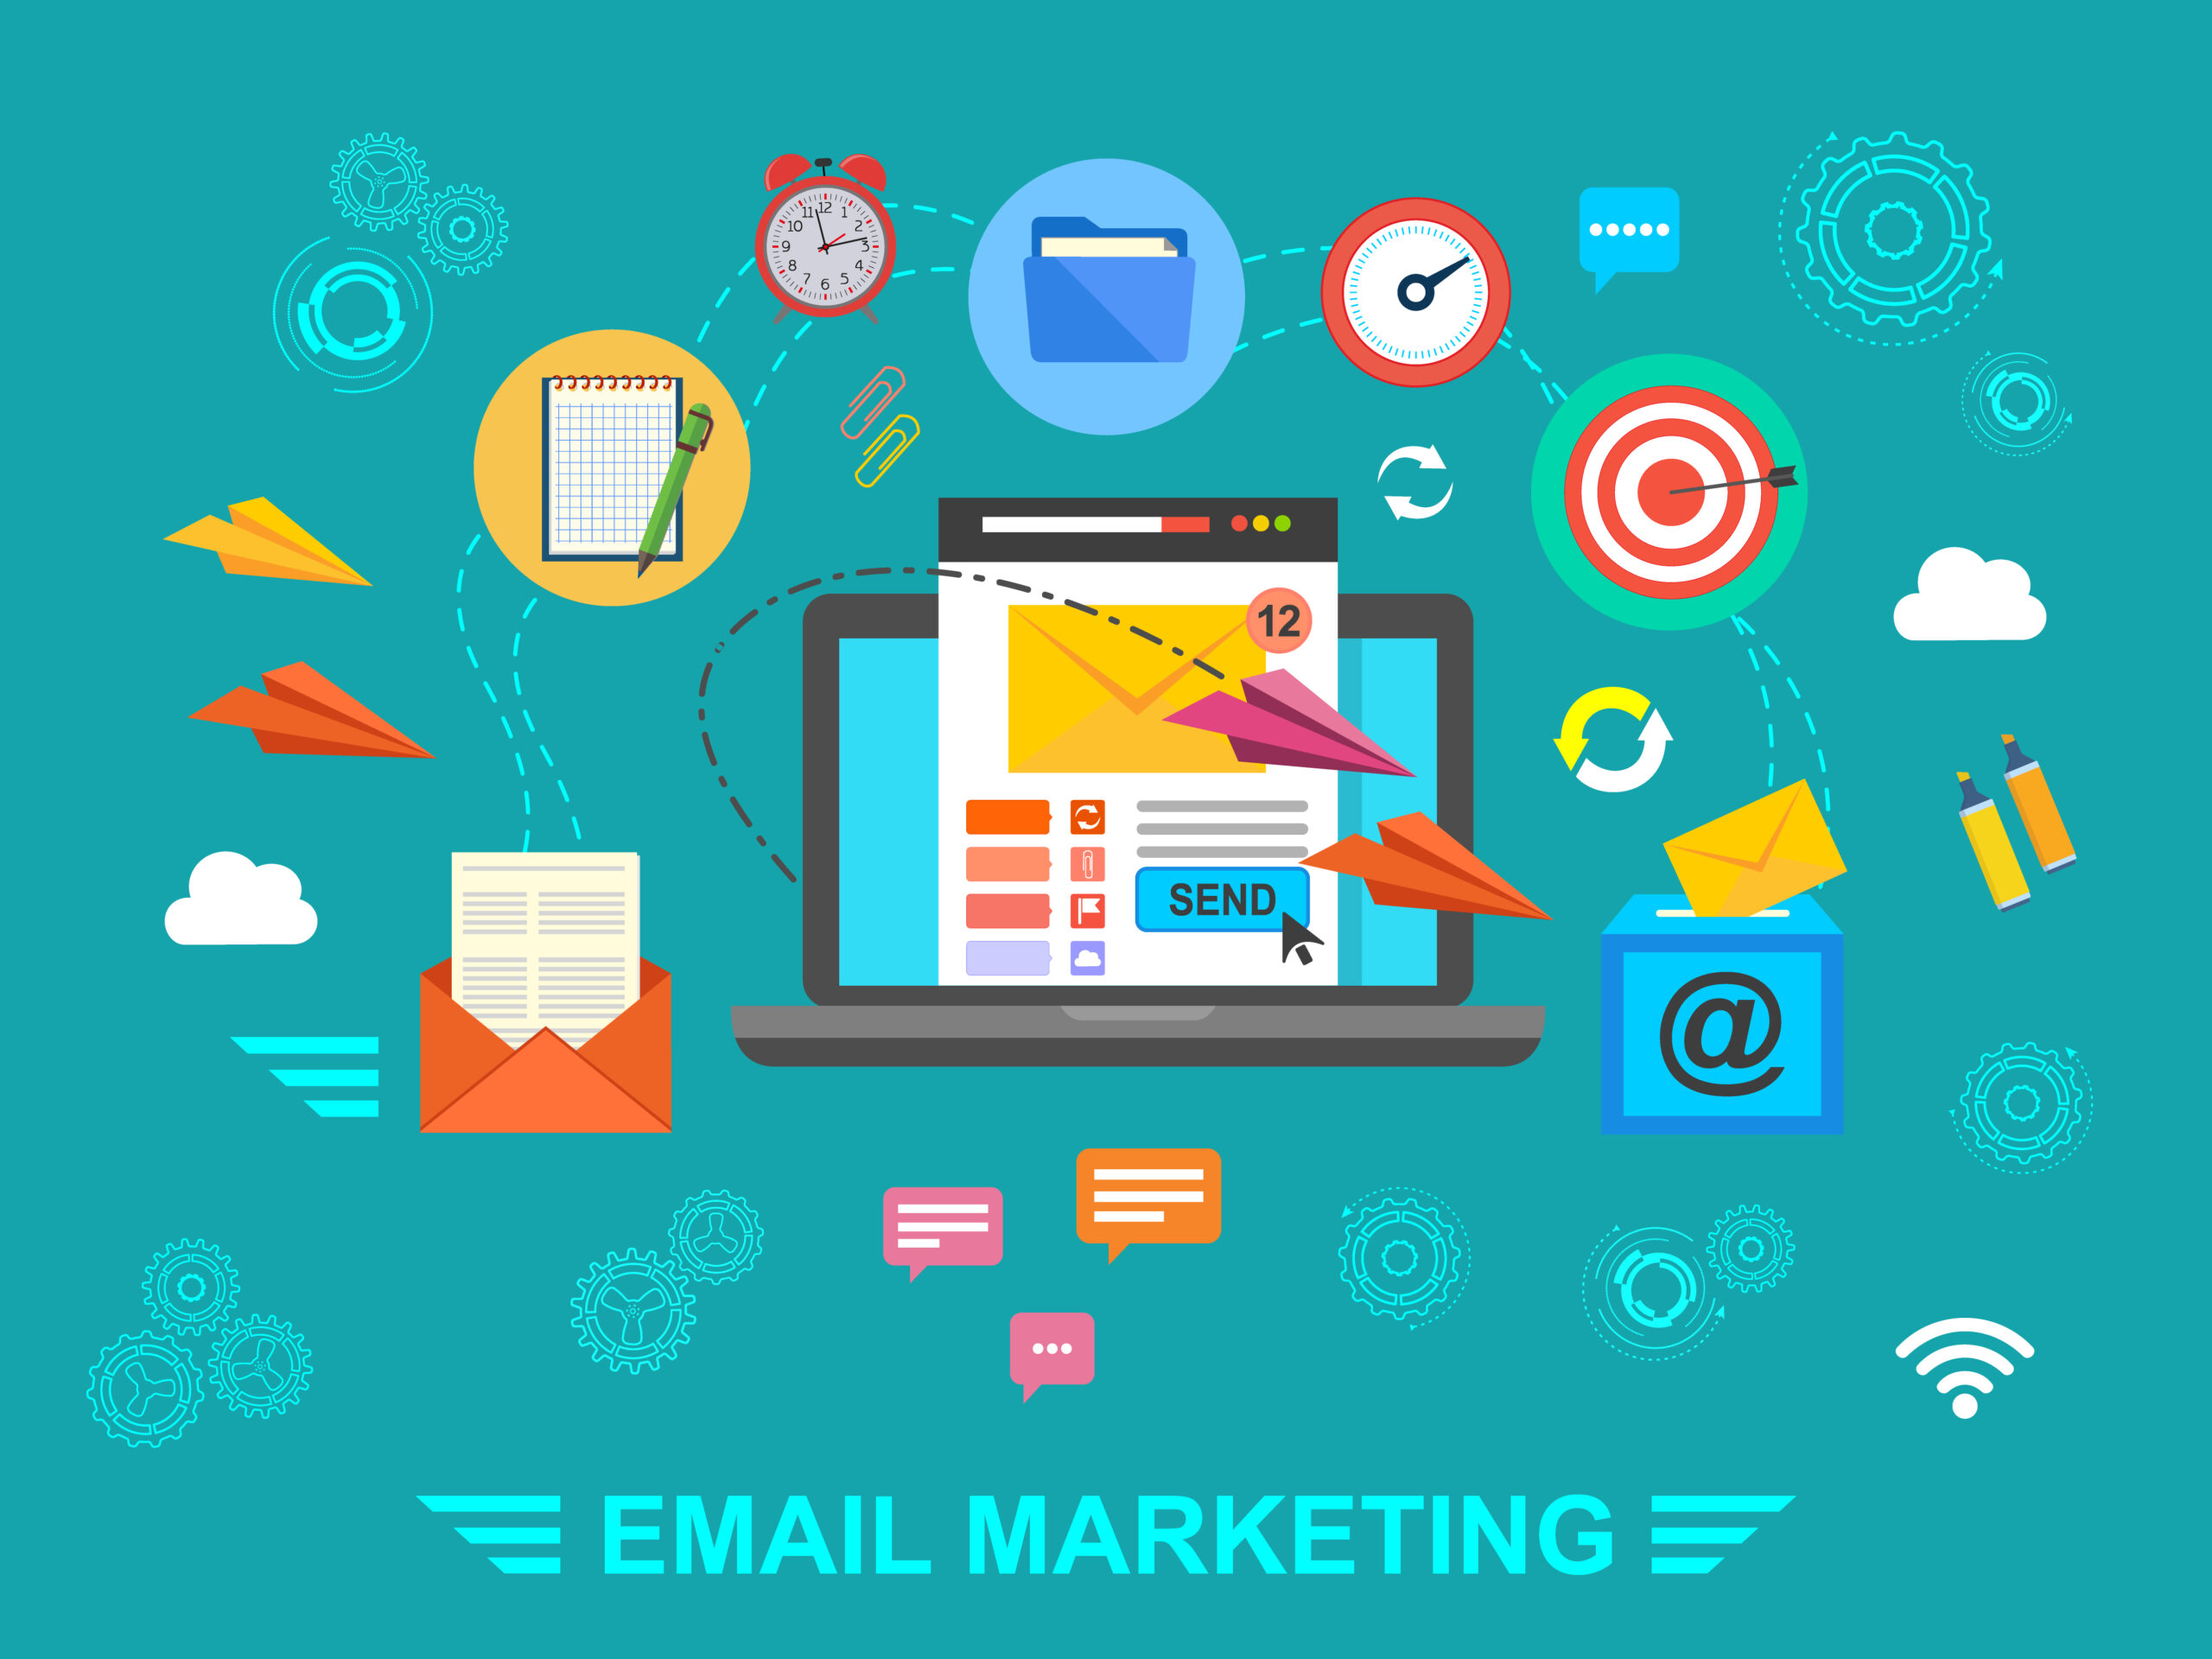 Getting Sophisticated with Email Marketing